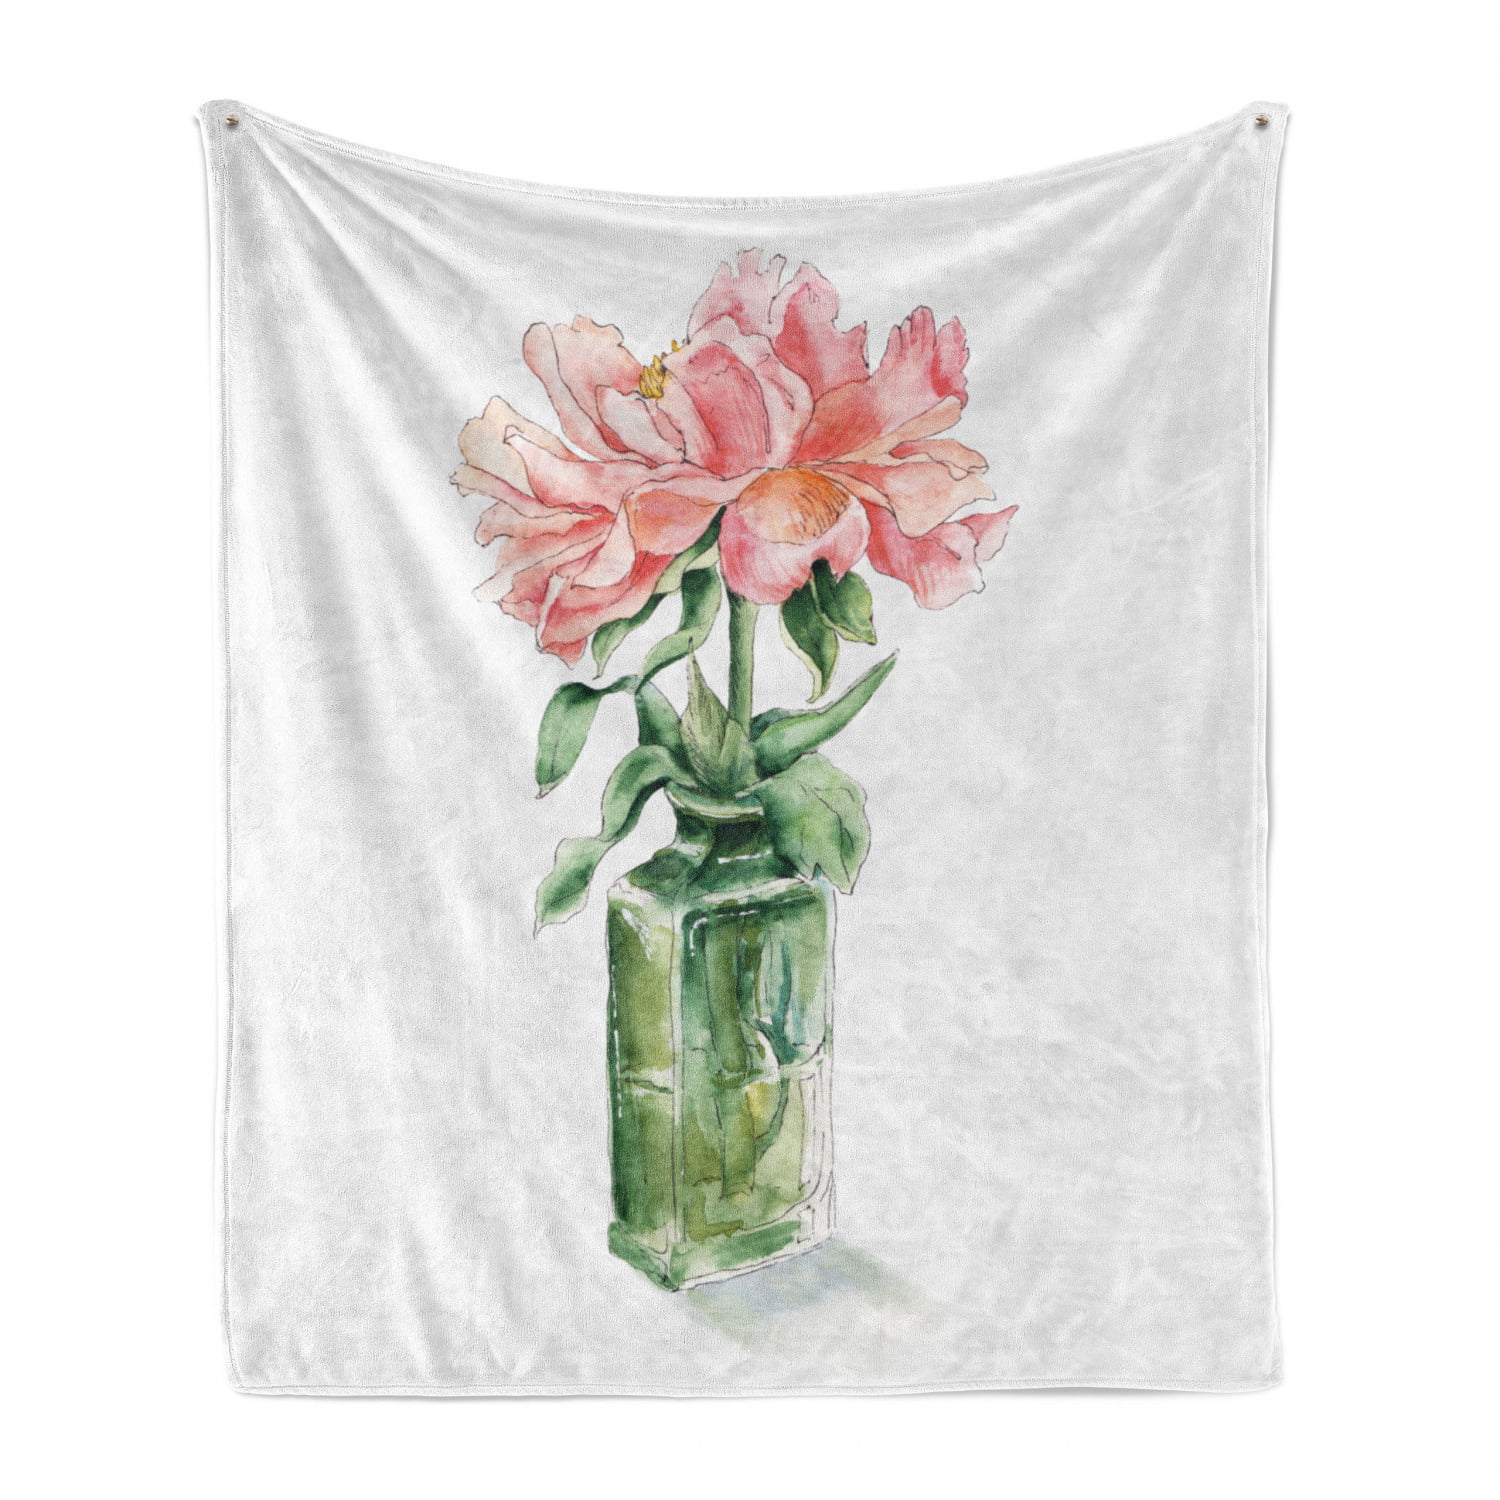 Watercolor Style Flowers Tulips Roses Colored Leaves Garden Plants Design Print Ambesonne Flower Soft Flannel Fleece Throw Blanket Multicolor 50 x 60 Cozy Plush for Indoor and Outdoor Use 